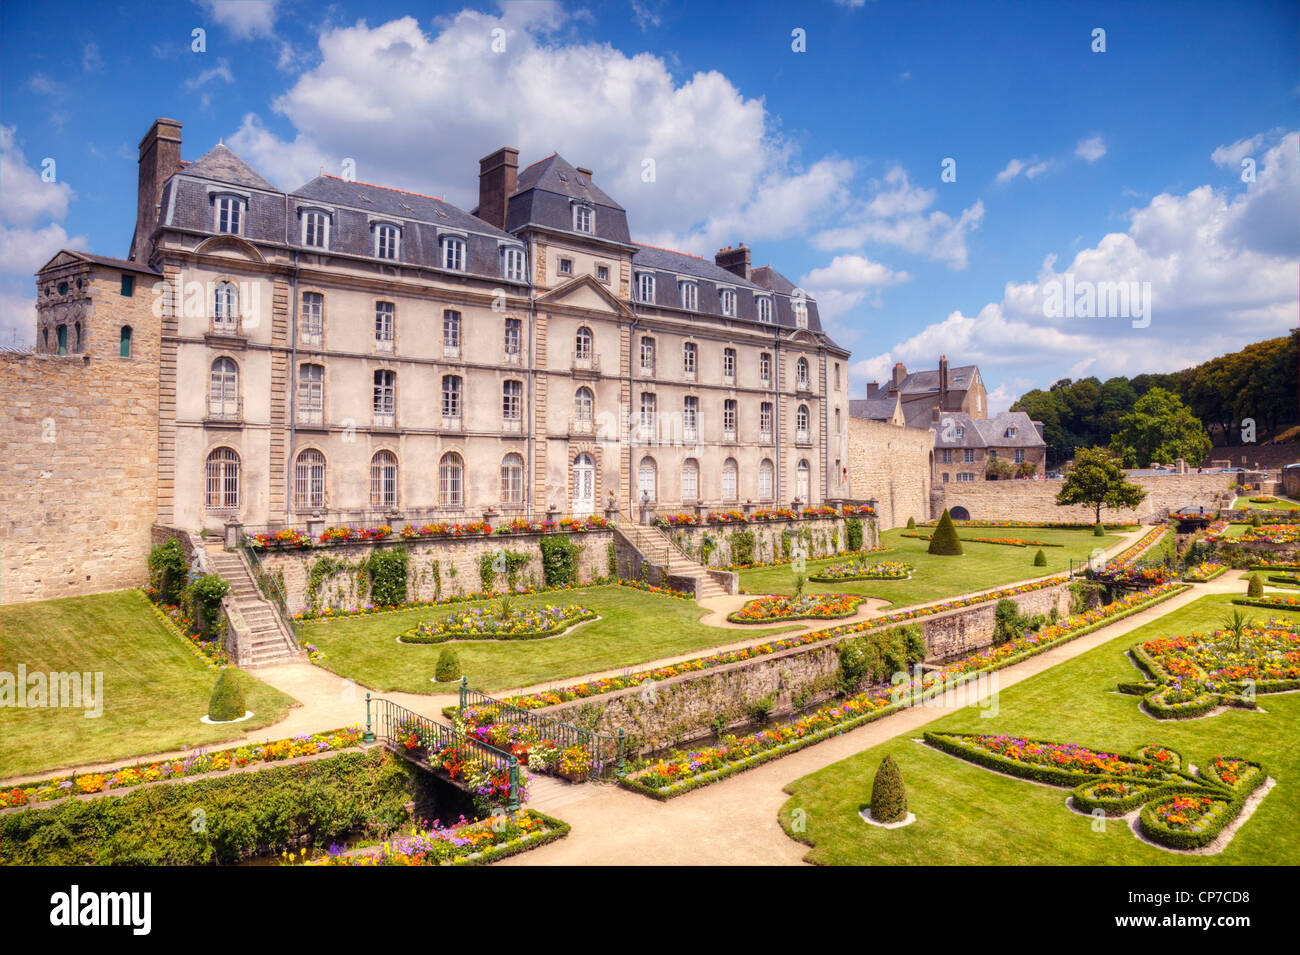 The Chateau de l'Hermine, also known as the Hotel Lagorce, Vannes, France Stock Photo